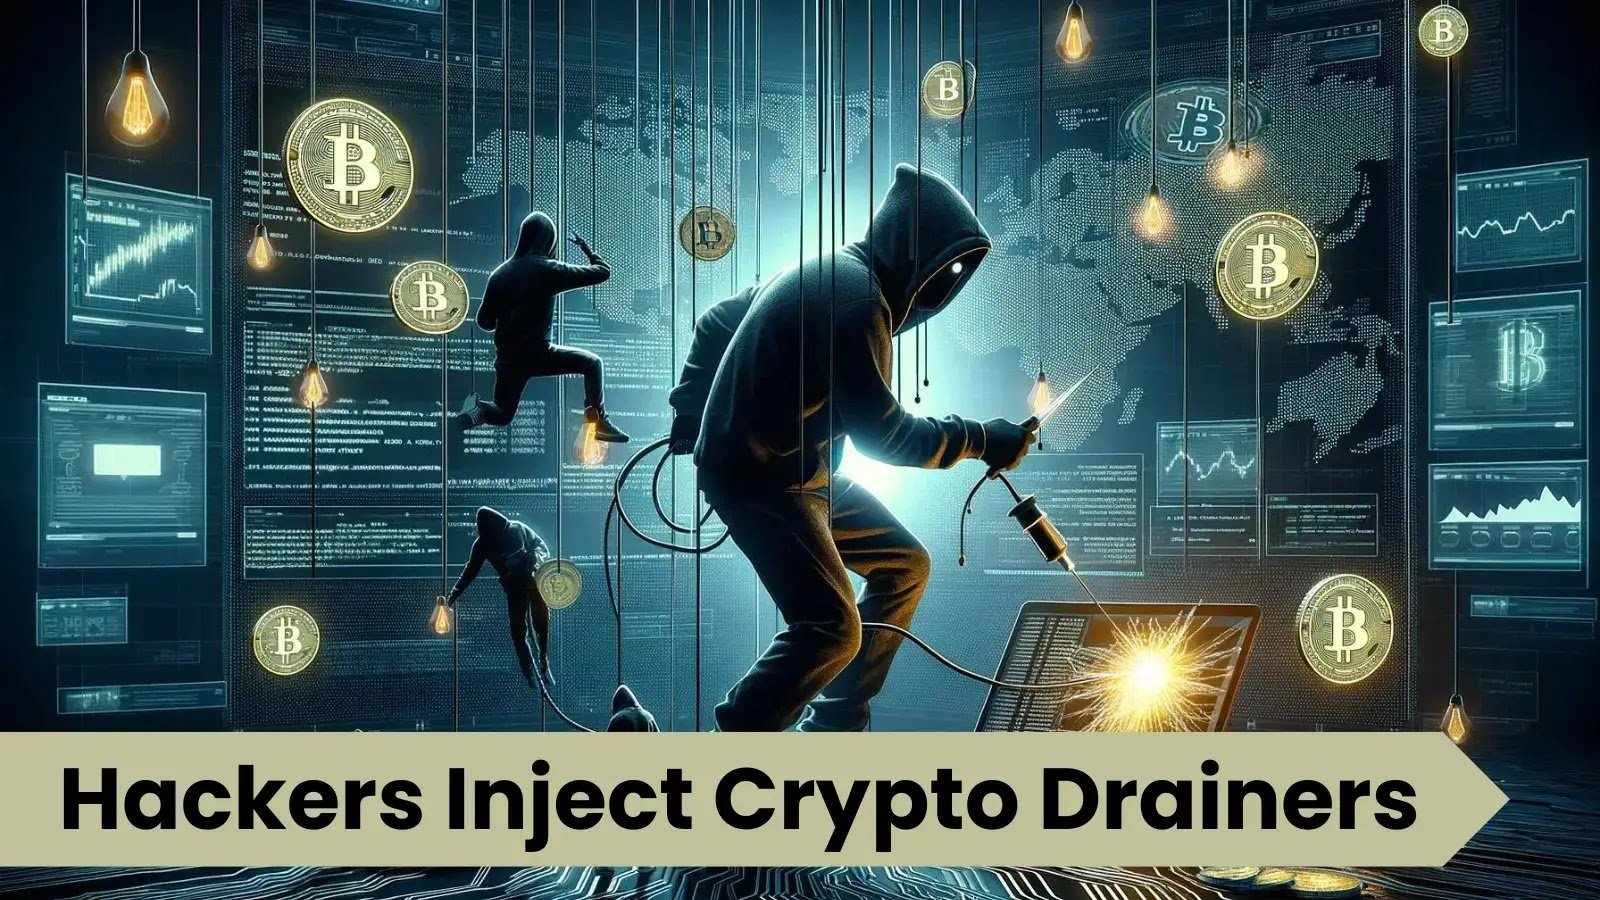 Hackers Inject Crypto Drainers